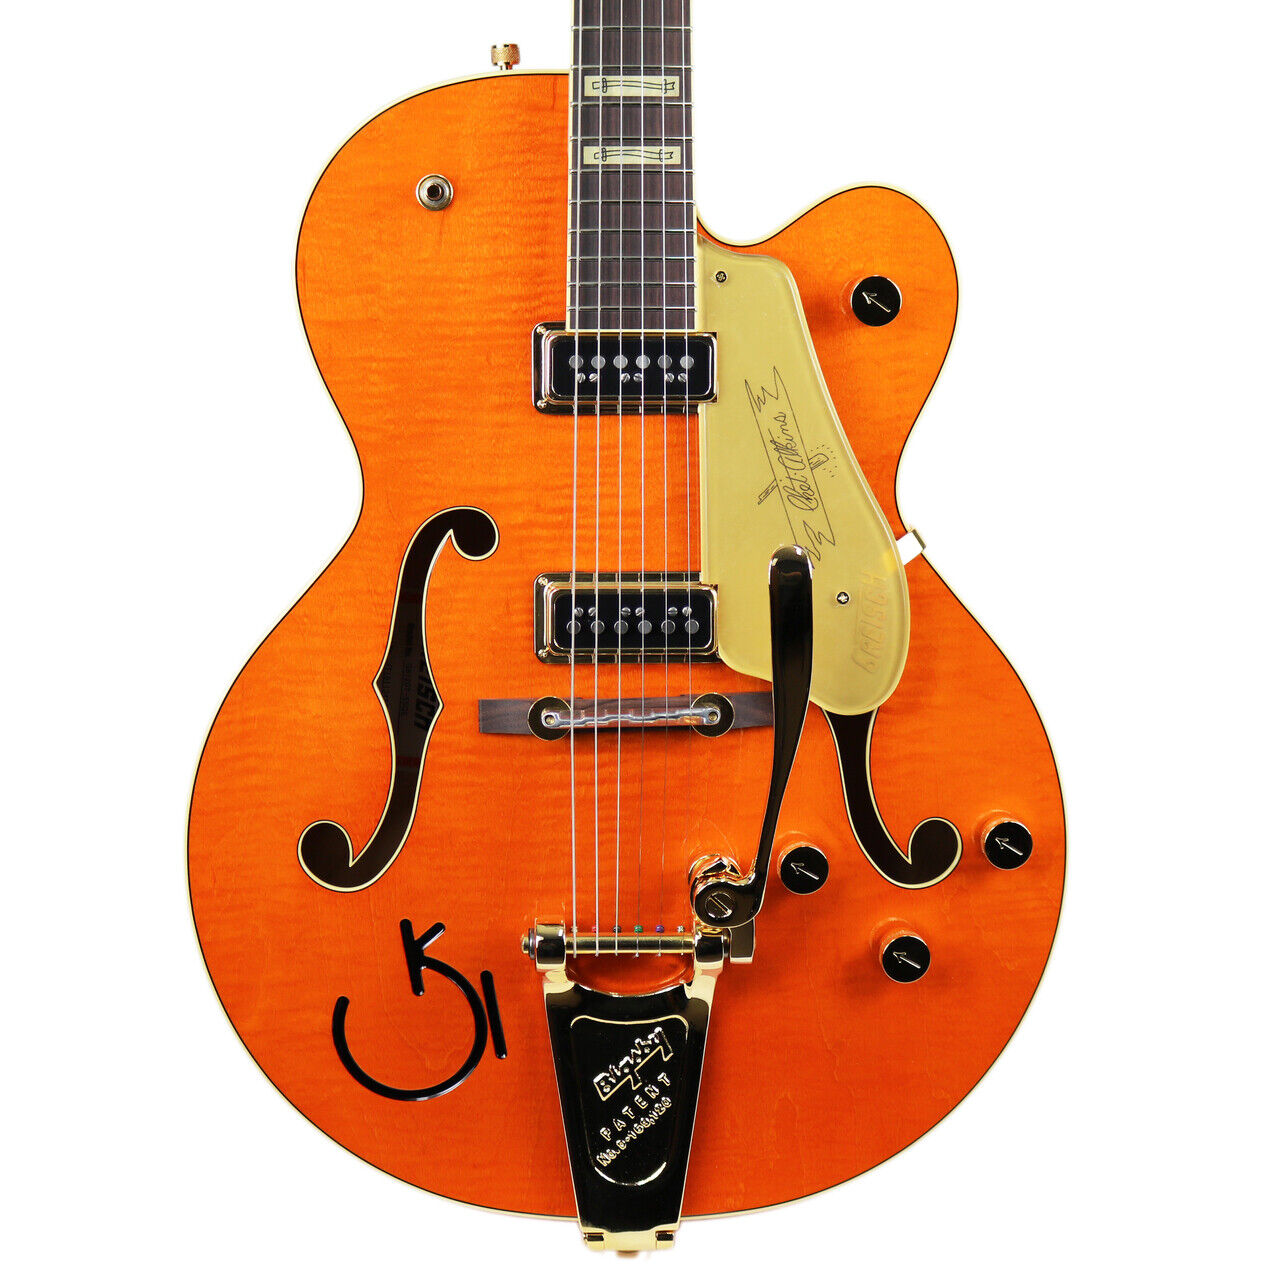 Gretsch G6120T-55 Vintage Select '55 Chet Atkins Hollow Body